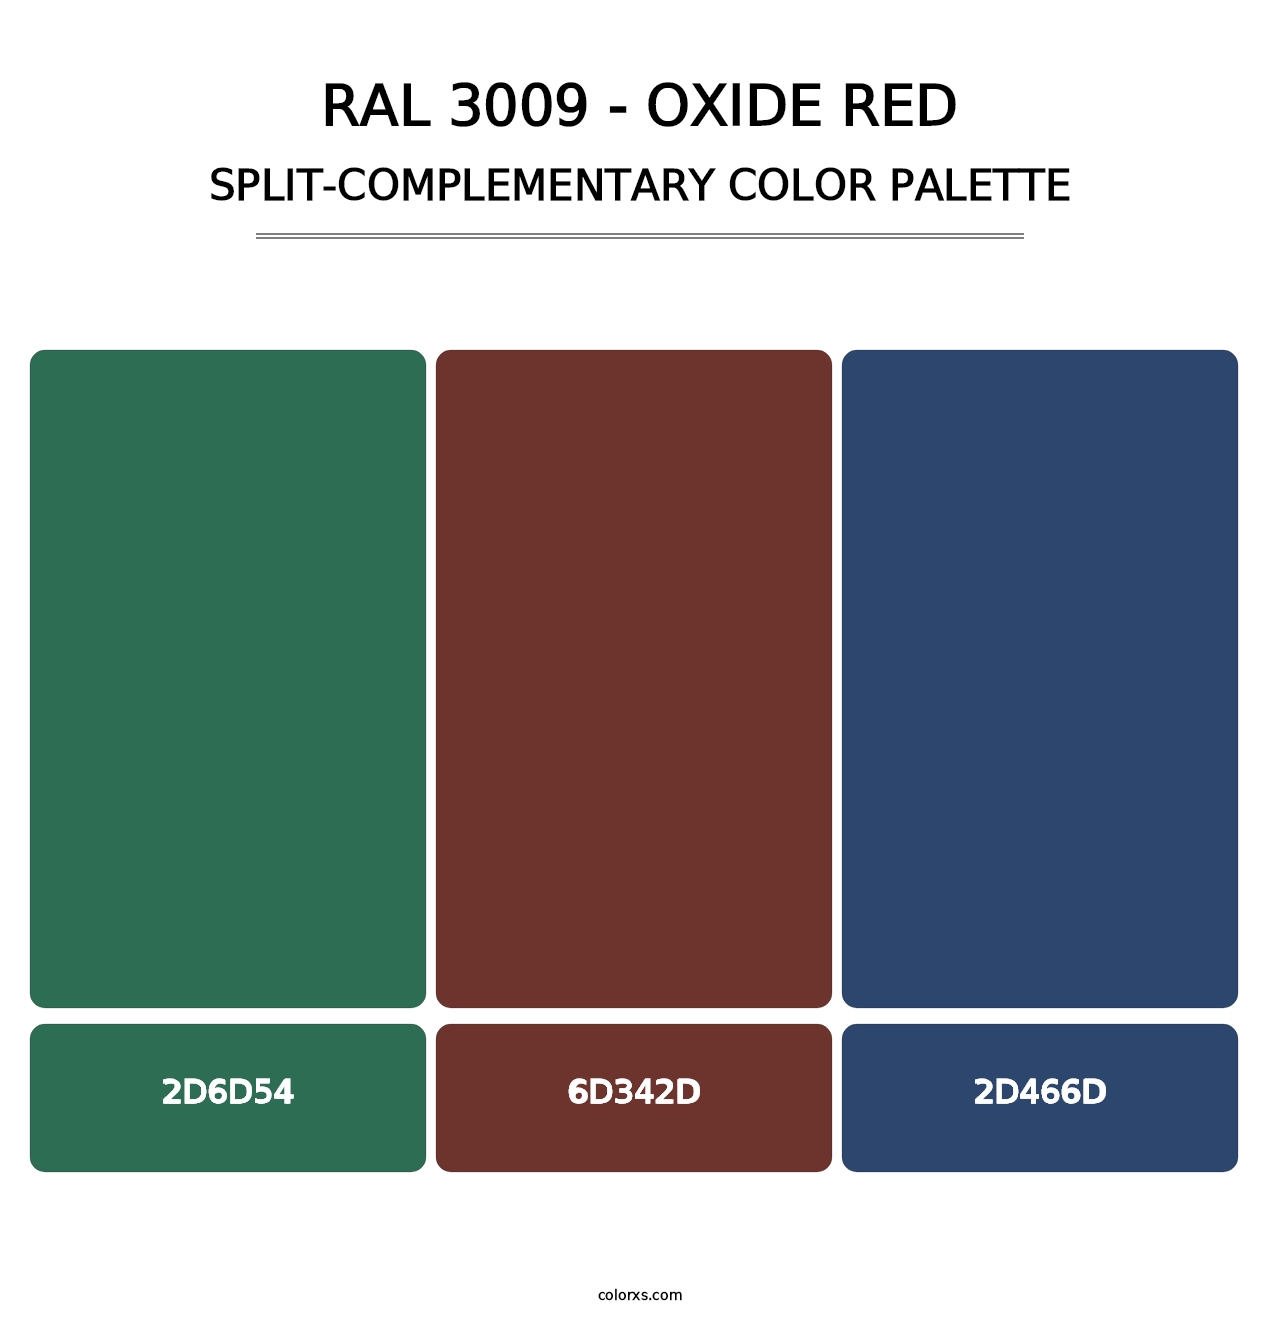 RAL 3009 - Oxide Red - Split-Complementary Color Palette